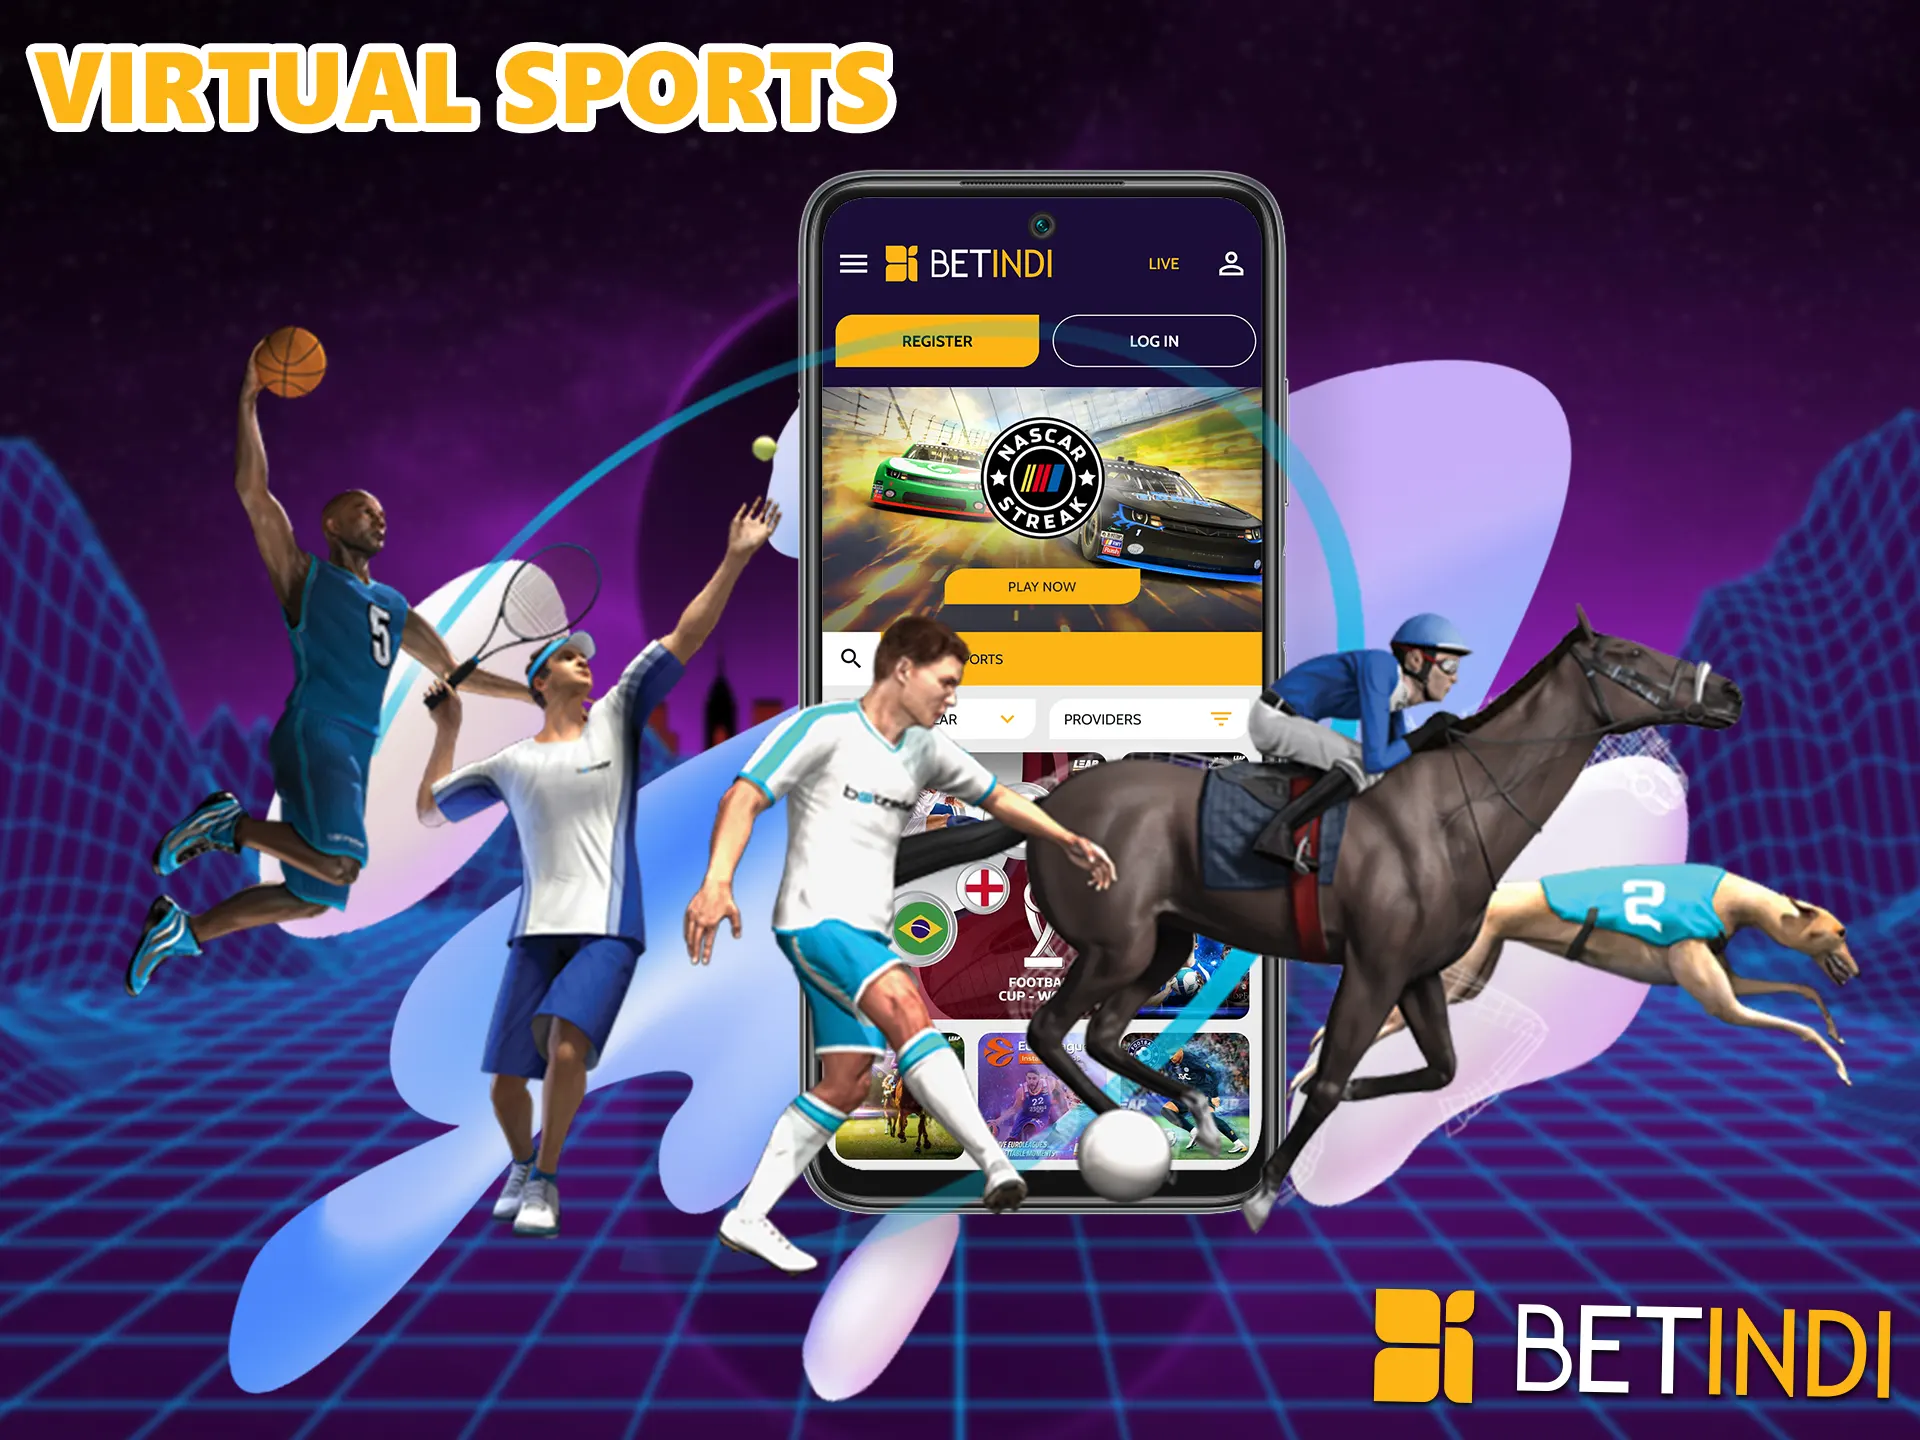 In this section, the player is available to bet on imaginary matches that work with the help of machine learning, here you have fun with friends.